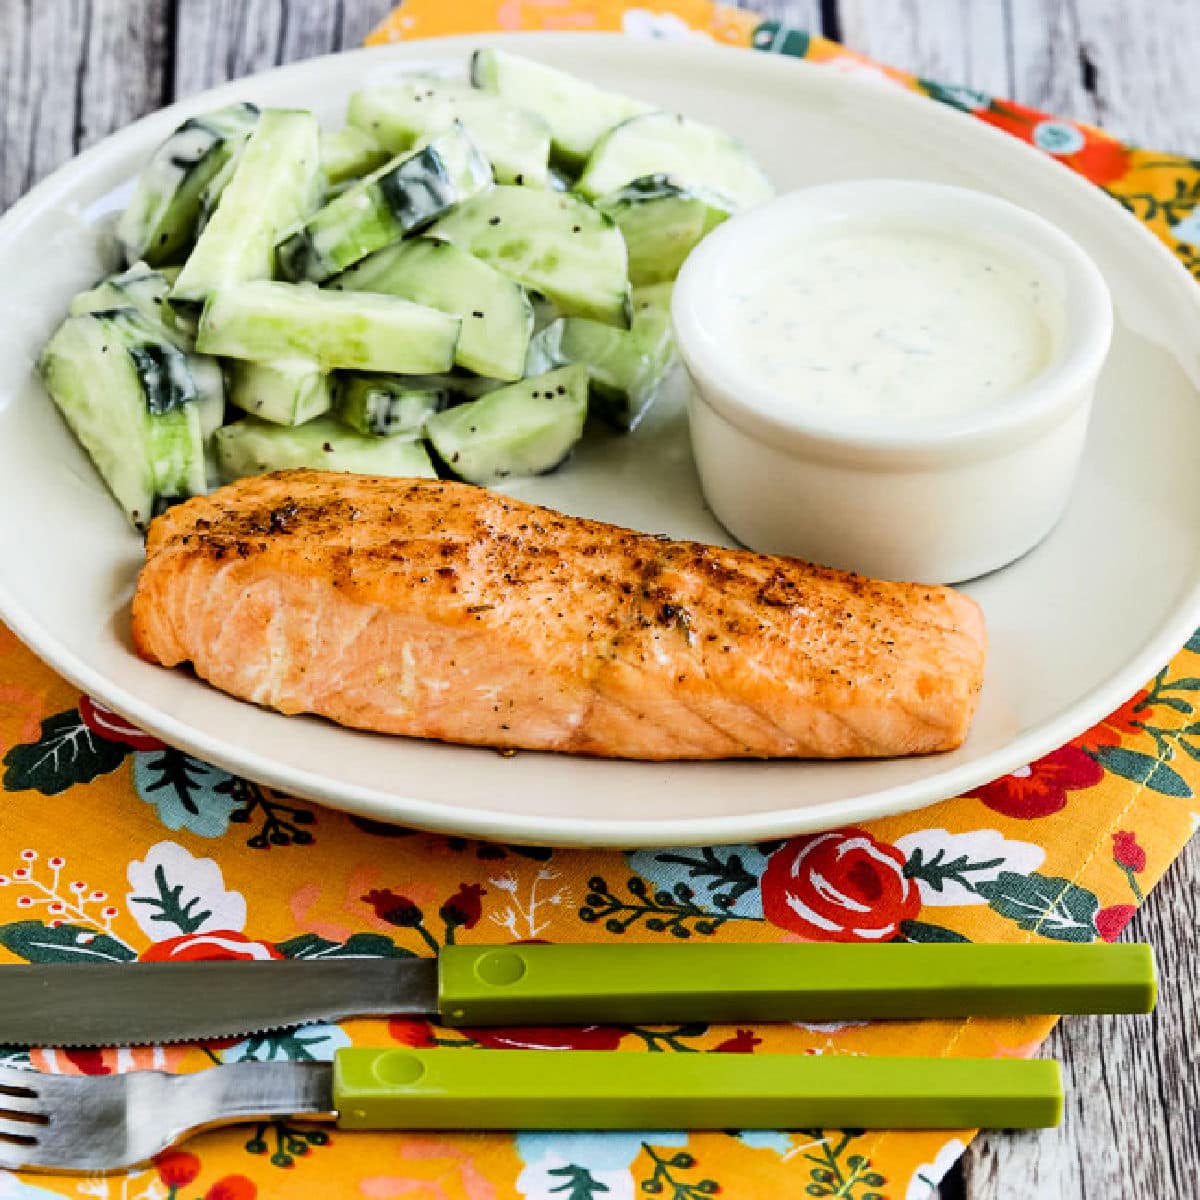 Square image for Air Fryer Salmon Recipe showing cooked salmon on plate with mustard-herb sauce and cucumber salad.